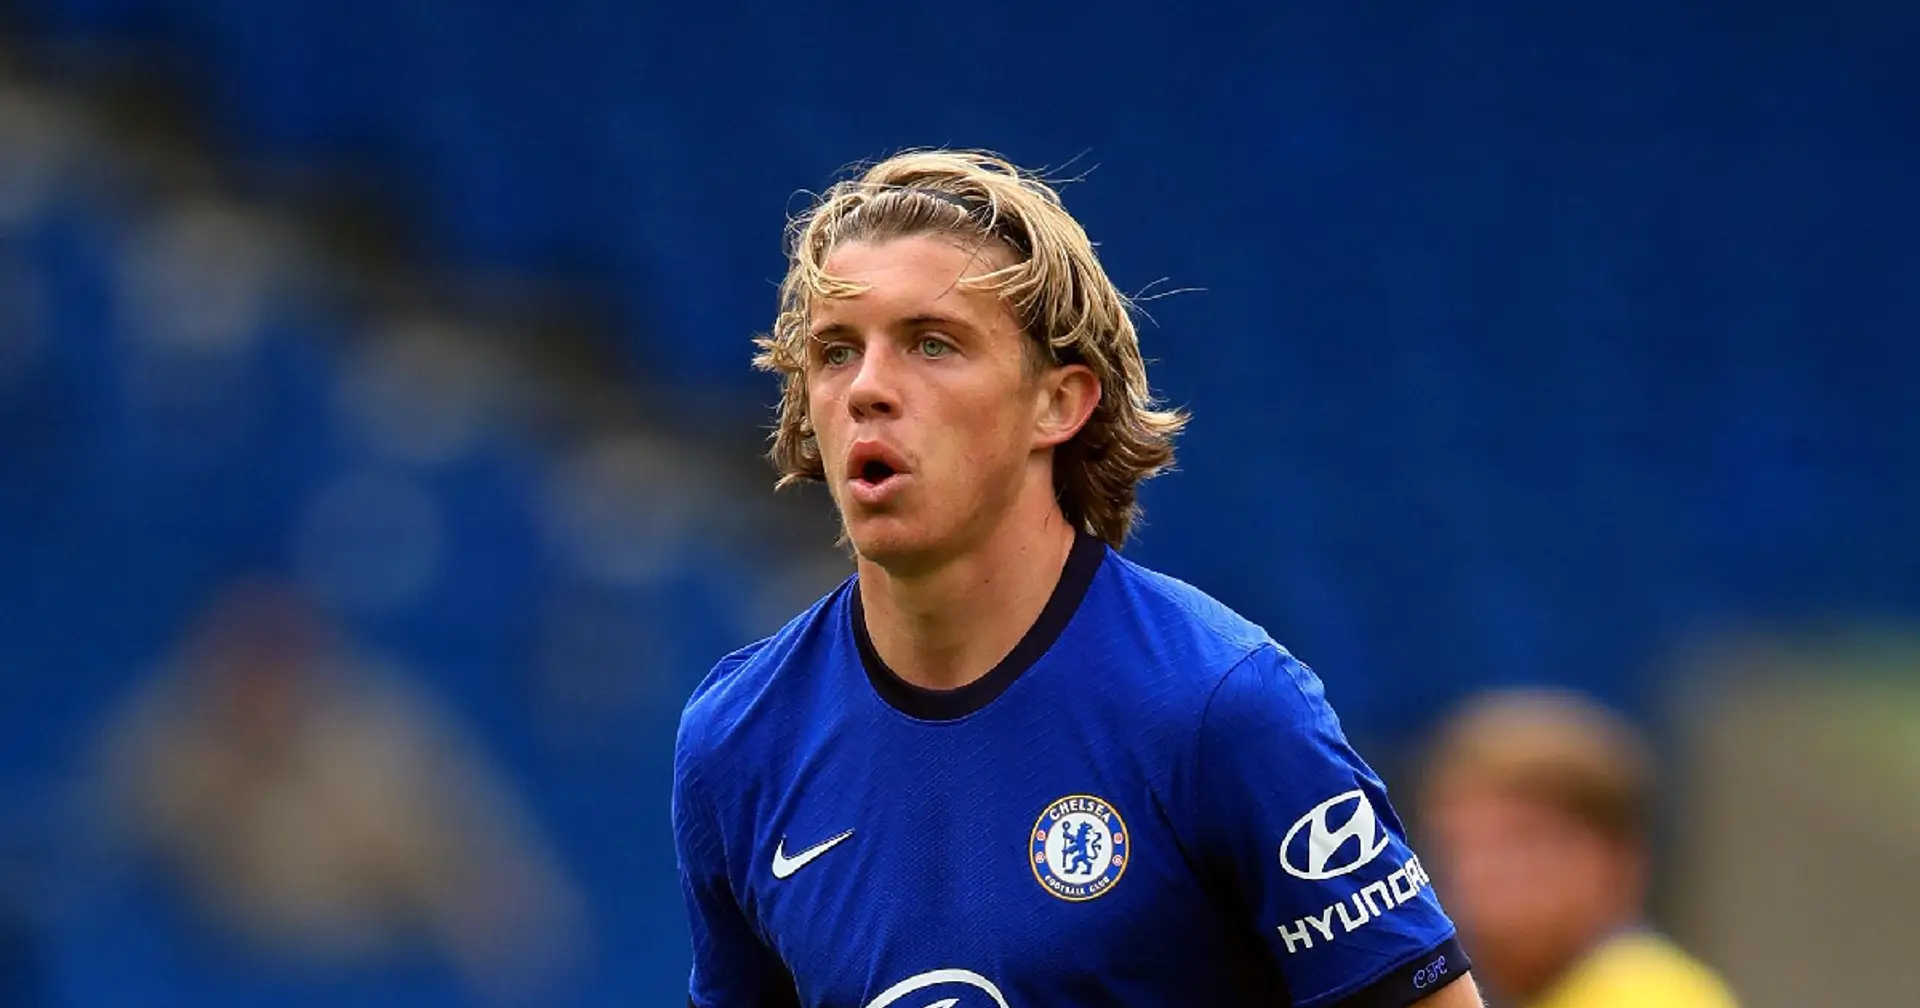 'I know they are watching': Chelsea starlet Gallagher confident about playing in Premier League